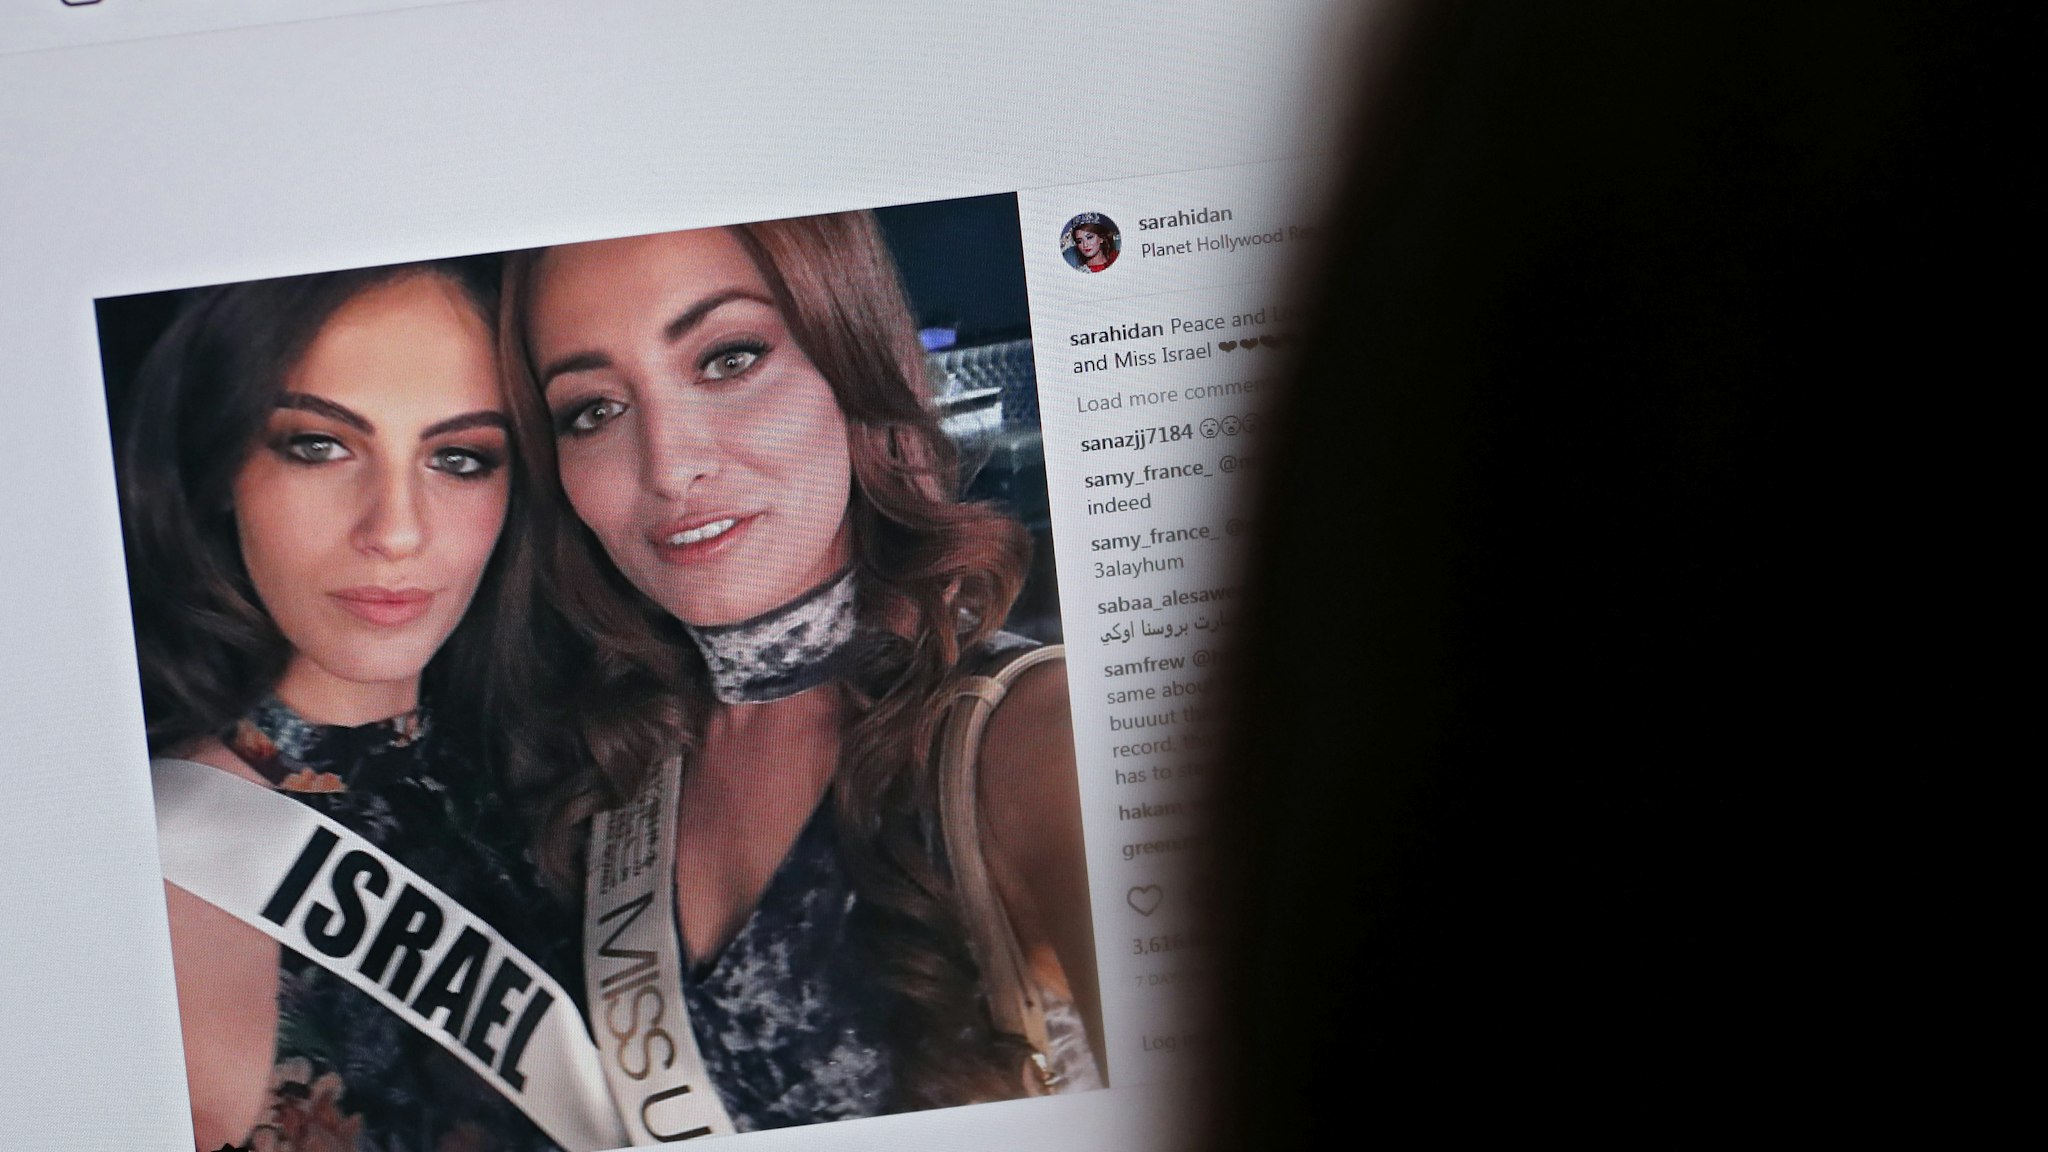 picture taken on November 21, 2017 shows a picture posted by the Instagram profile of Sarah Idan on November 14, who holds the titles of "Miss Iraq USA 2016" and "Miss Iraq Universe 2017", as she is seen taking a "selfie" photograph with Adar Gandelsman, who holds the title of "Miss Universe Israel 2017", with a caption reading: "Peace and Love from Miss Iraq and Miss Israel #missuniverse".